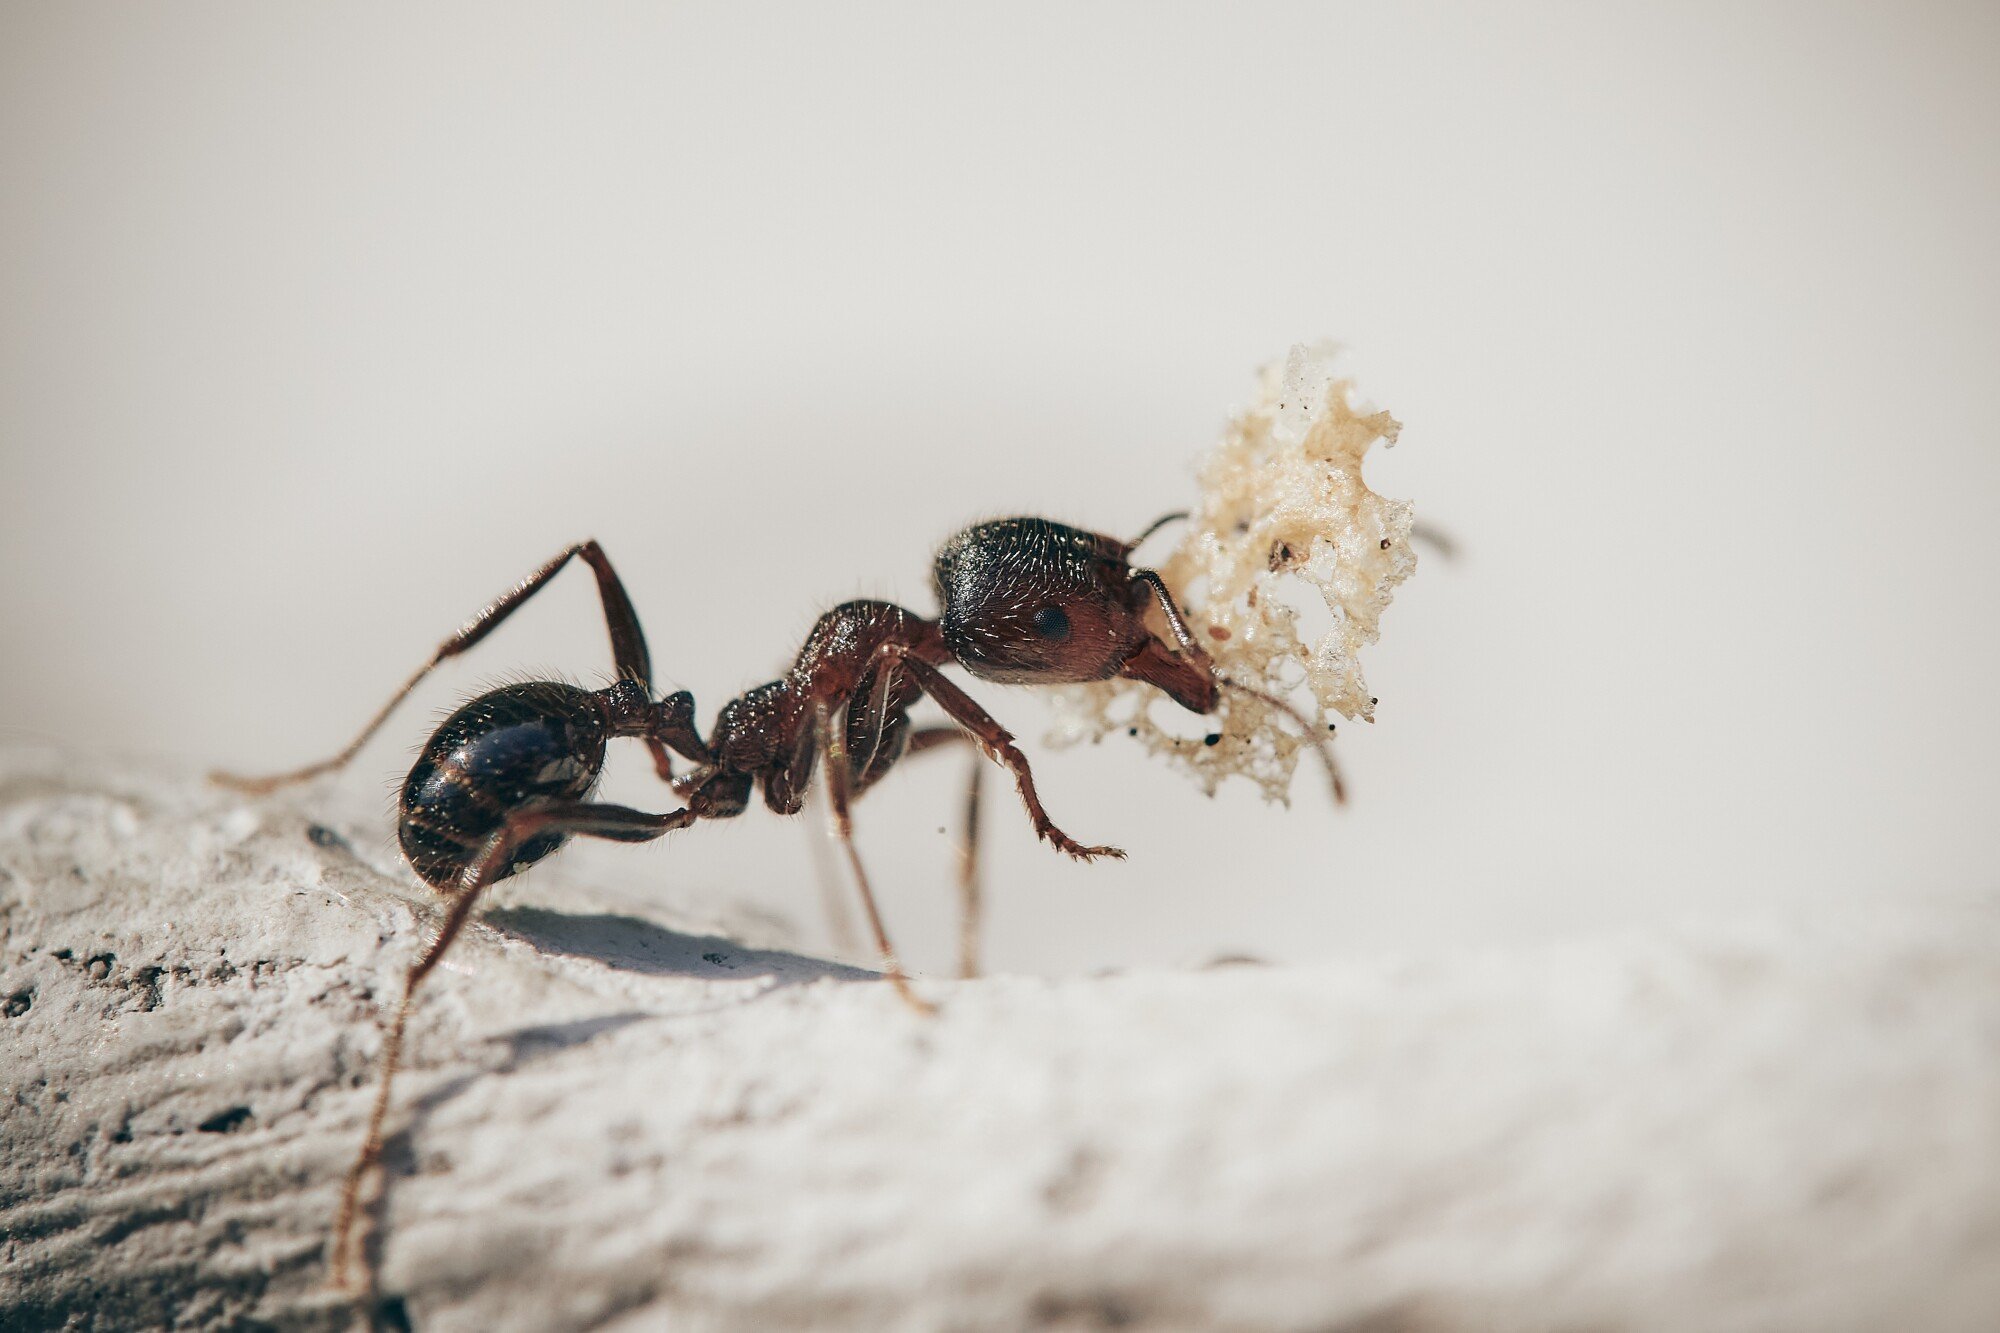 guardianpest ant control